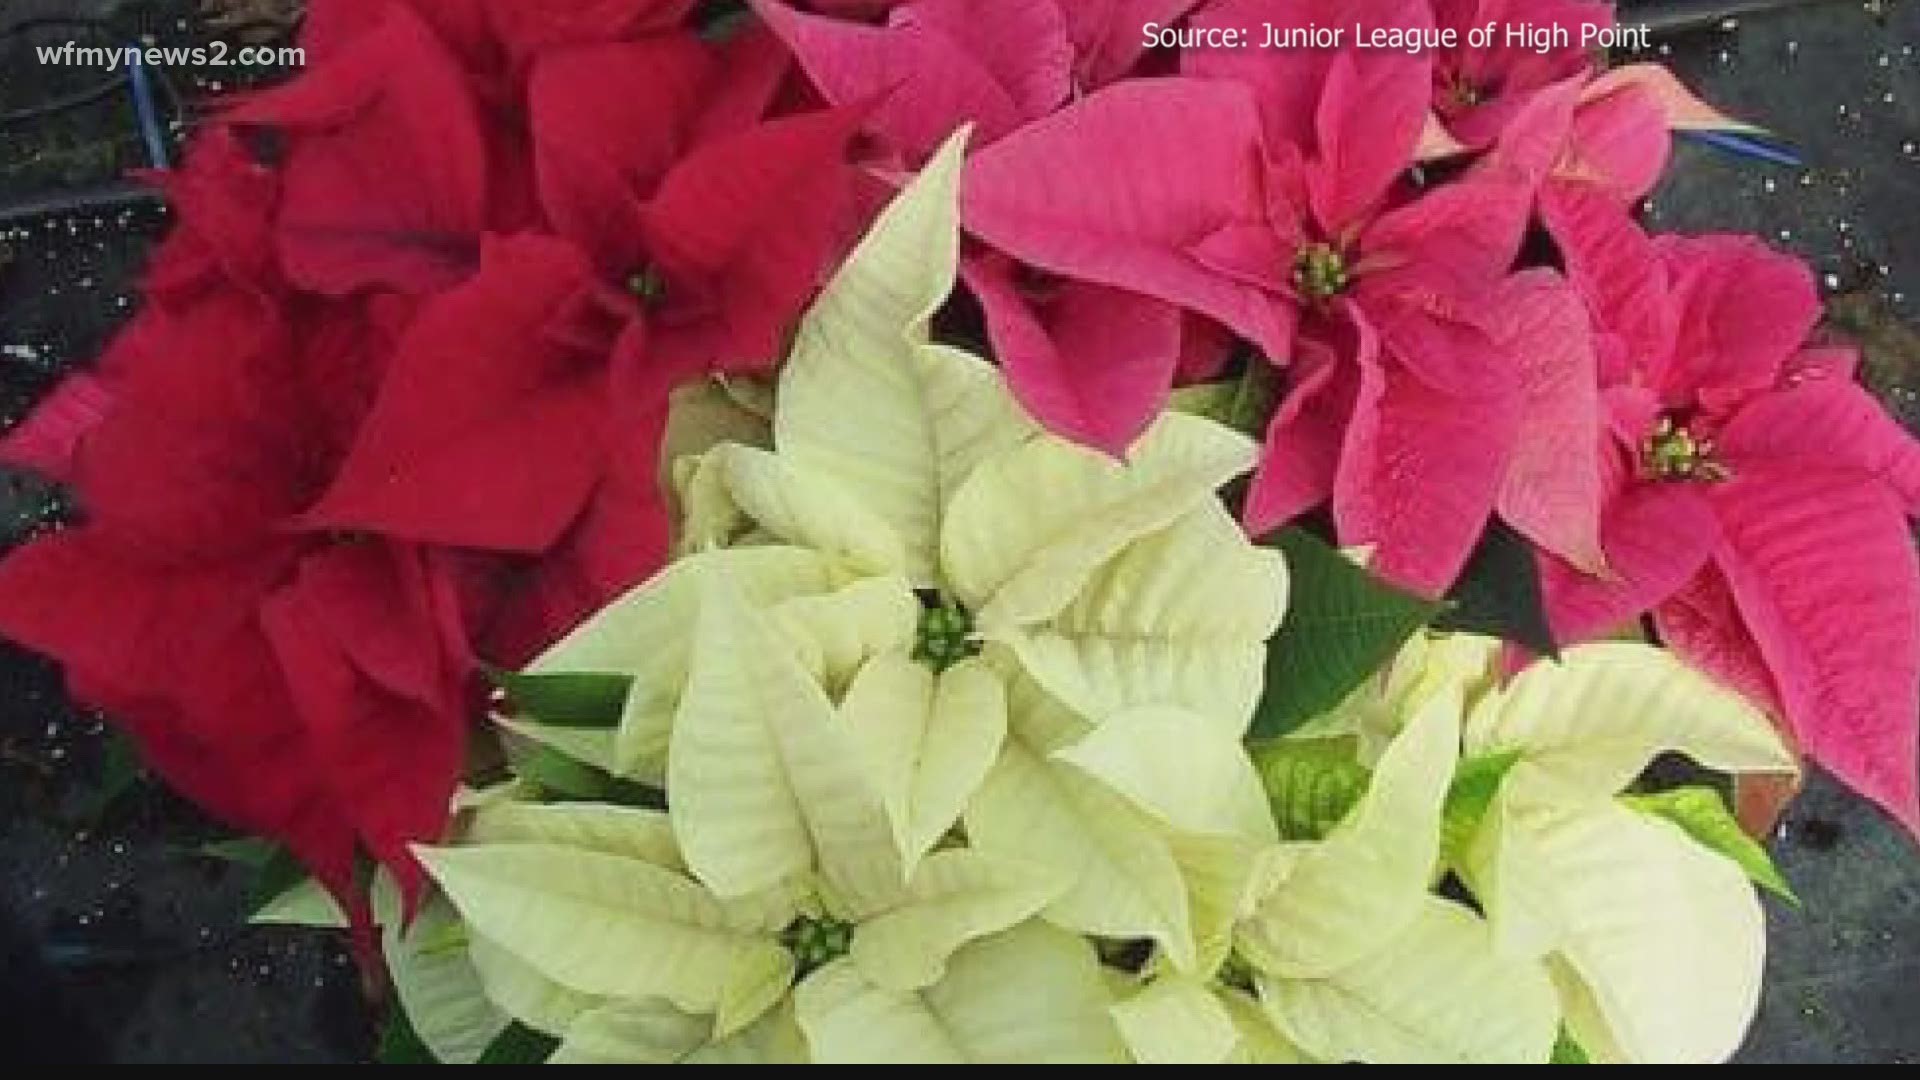 Order beautiful poinsettia plants in a variety of sizes and colors and help the Junior League of High Point's community mission.